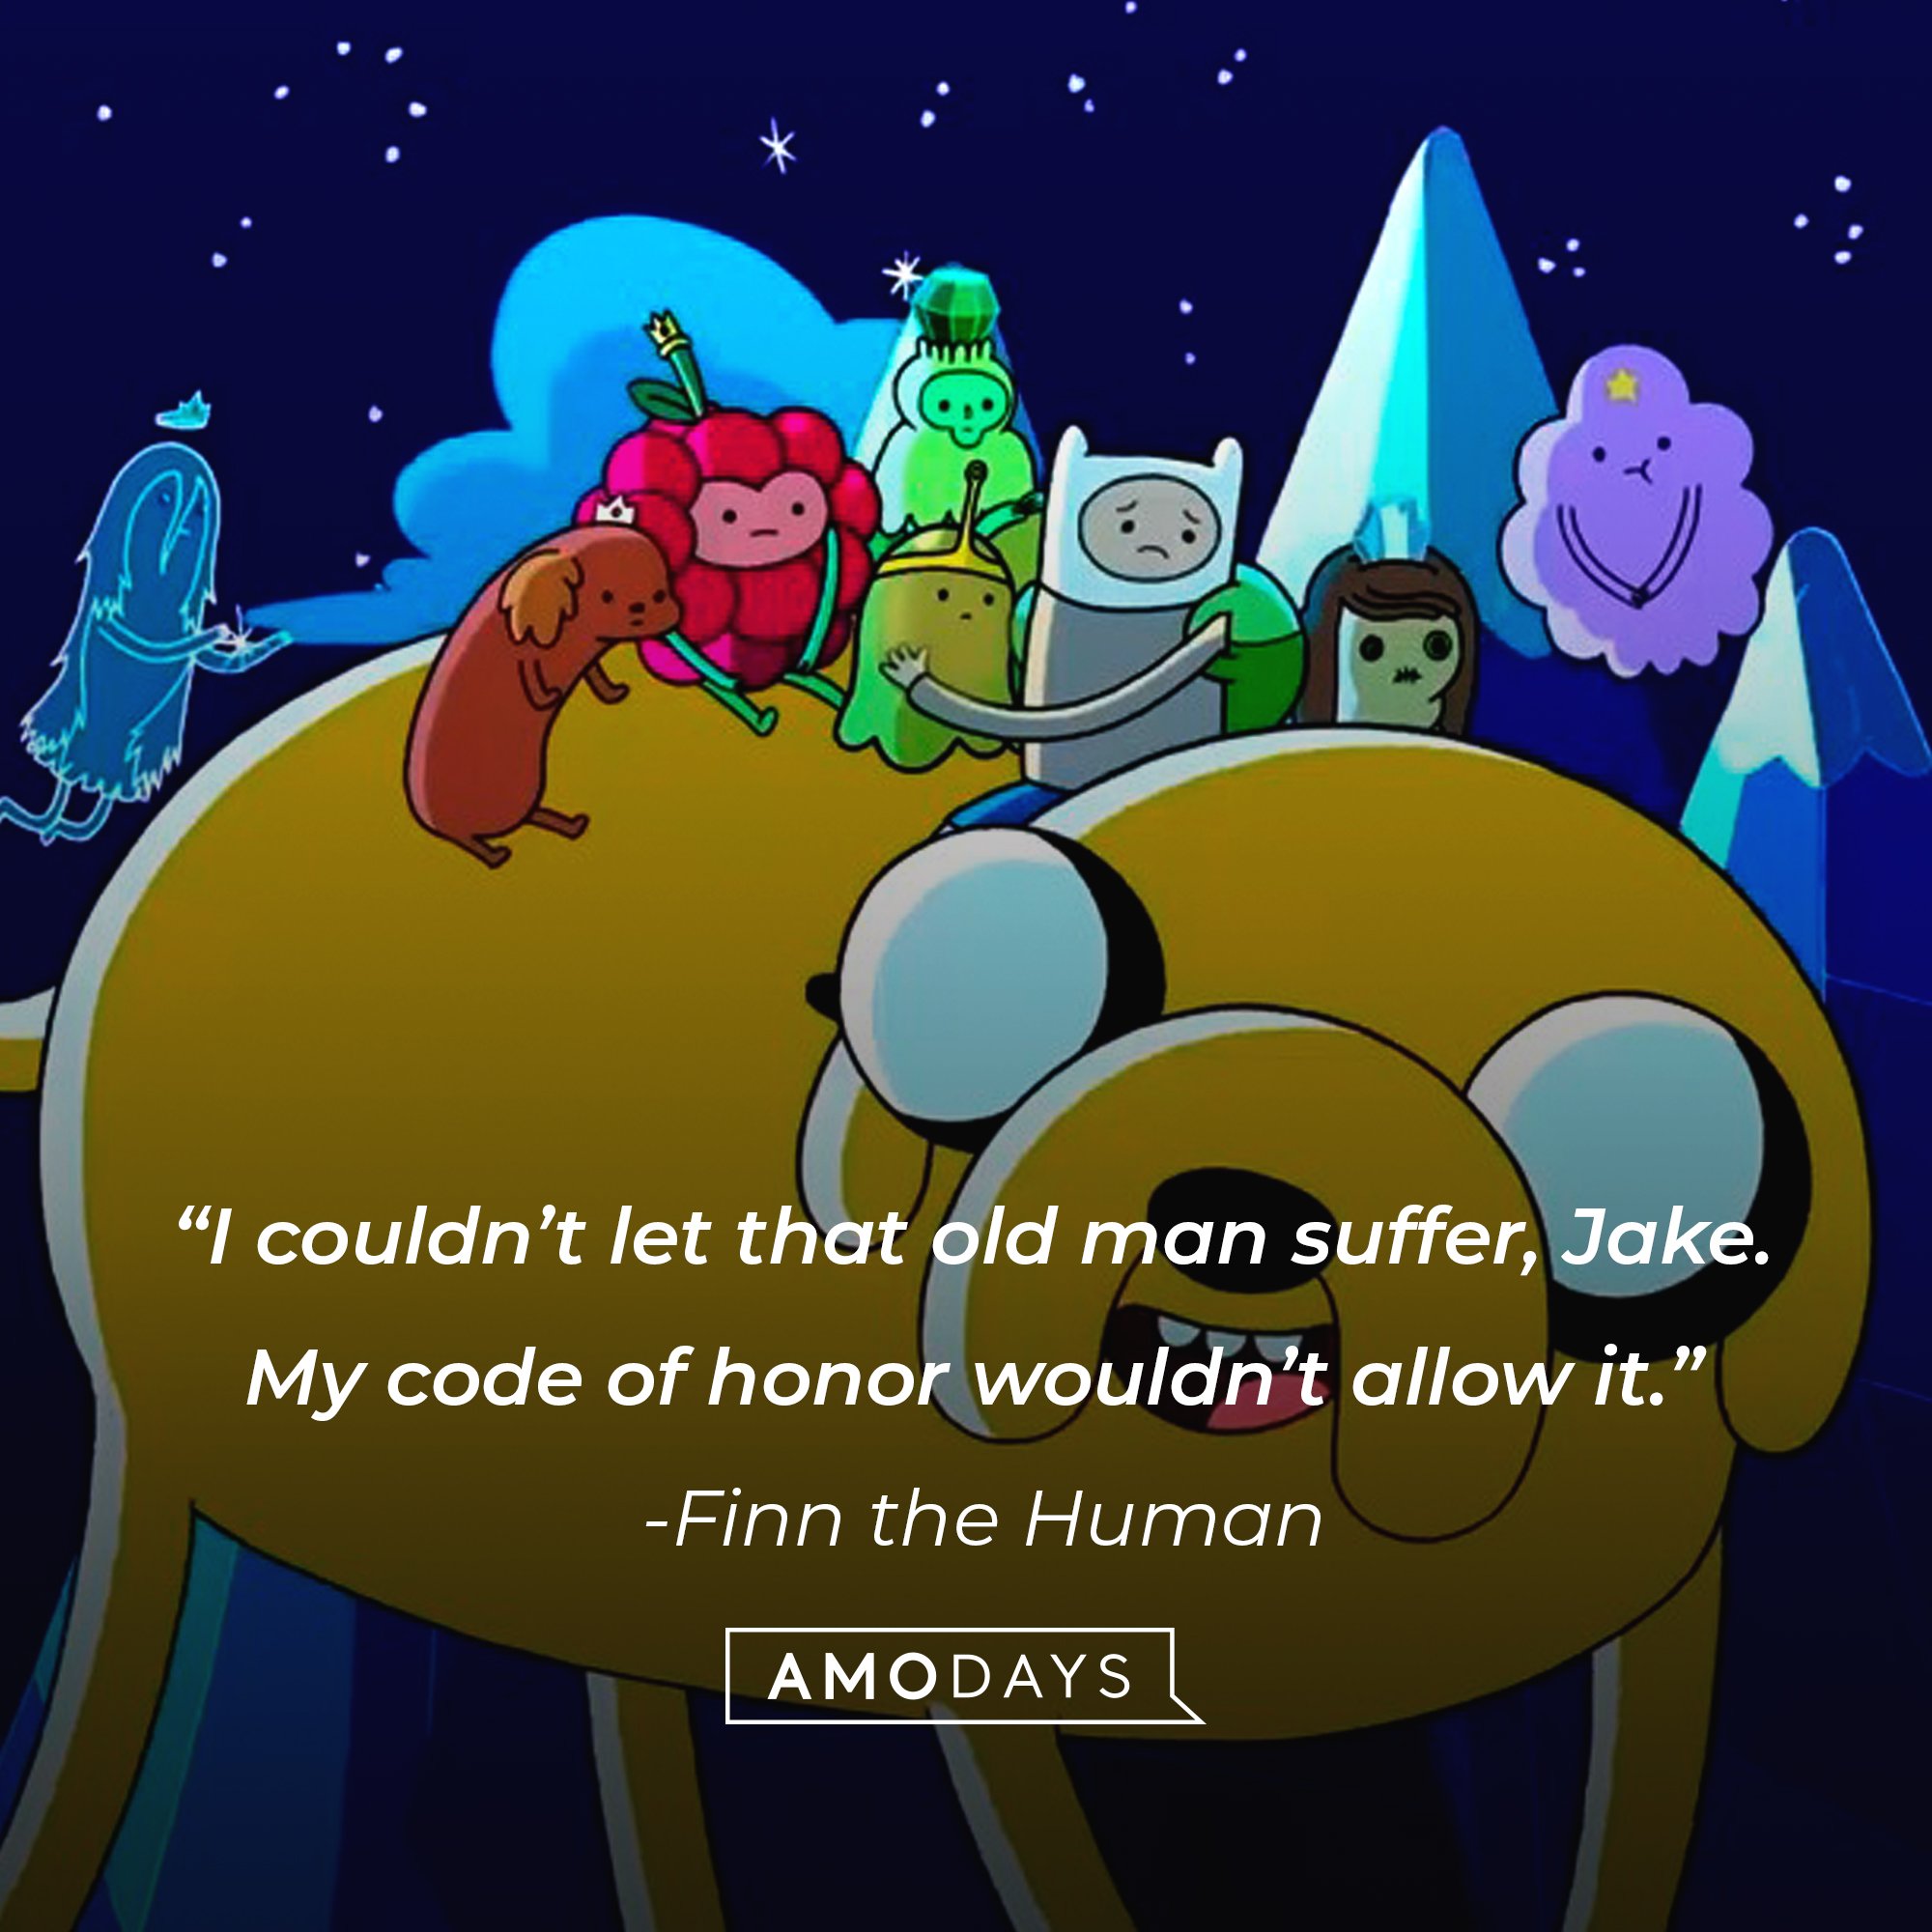    Finn the Human’s quote:  “I couldn’t let that old man suffer, Jake. My code of honor wouldn’t allow it.” | Image: AmoDays